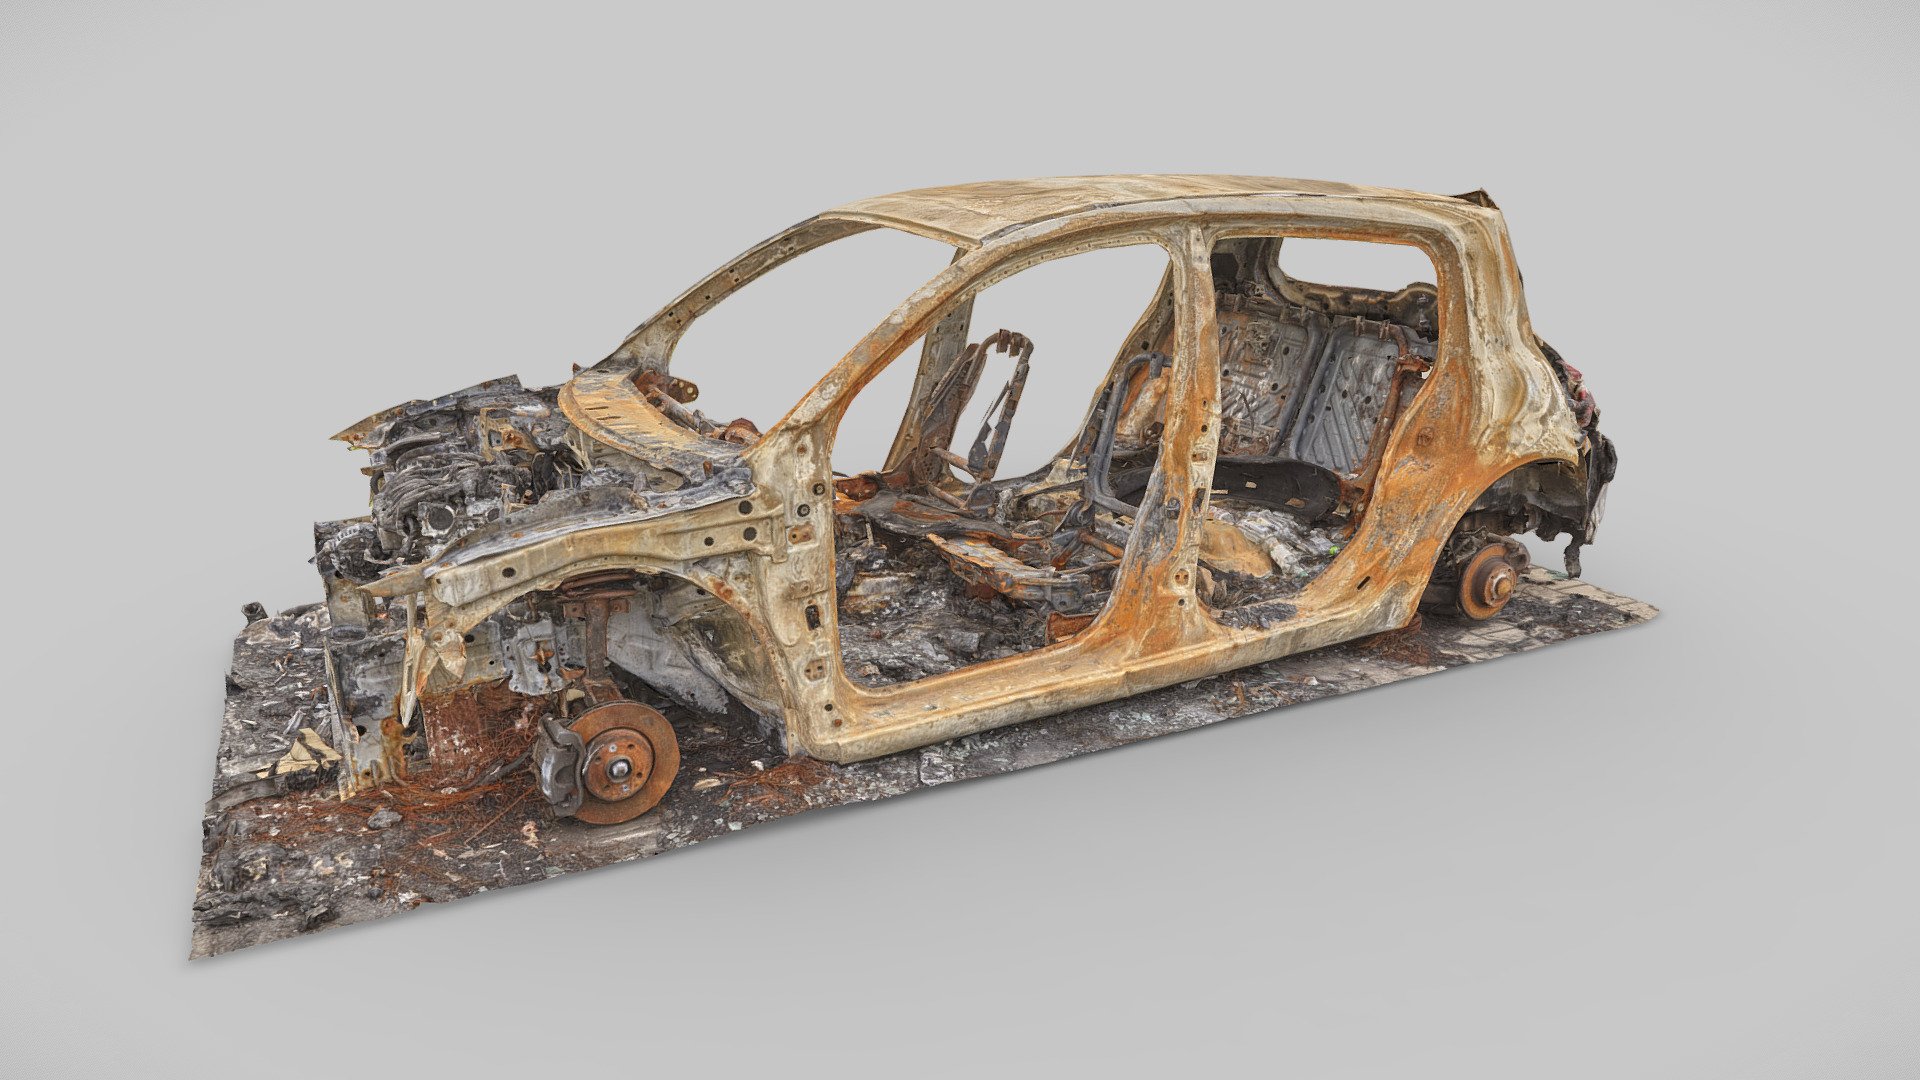 And abandoned burned car wreck of Renault Megane II. diff, normal , ao included. 8k textures - Burned Car Wreck - Renault Megane - Buy Royalty Free 3D model by robertusPL 3d model